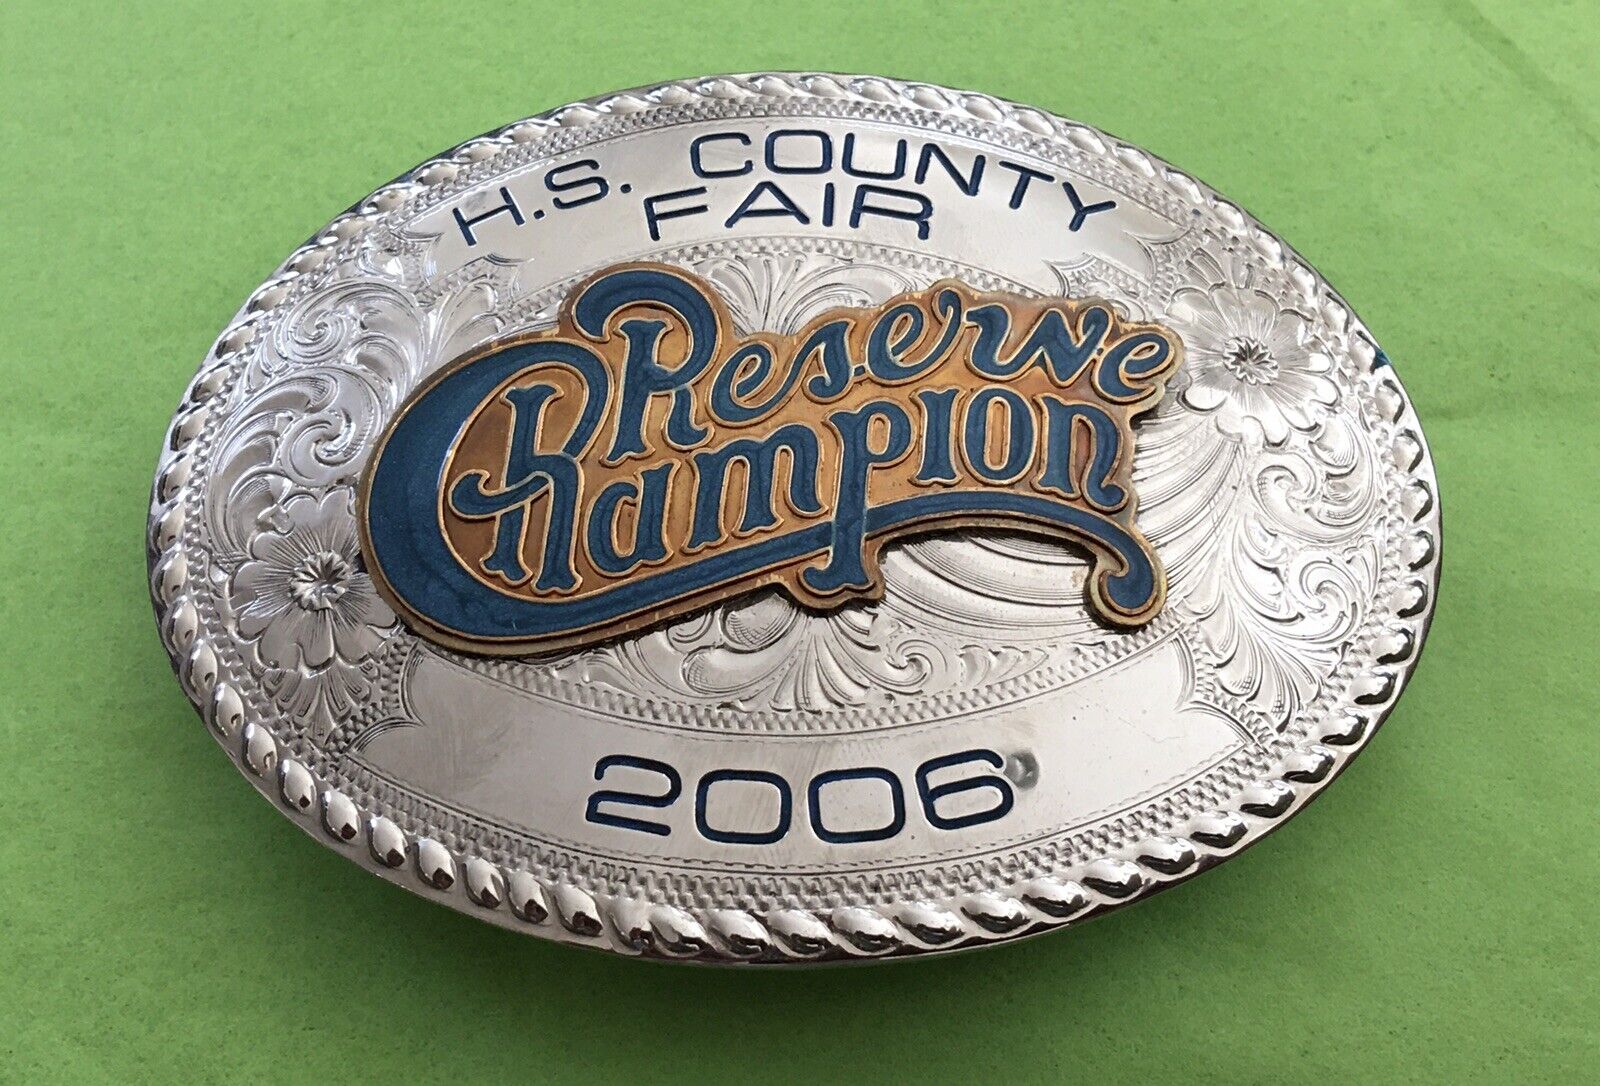 VINTAGE 2006 AMERICAN FAIR RODEO COWBOY CHAMPION WAGES SILVER TROPHY BELT BUCKLE